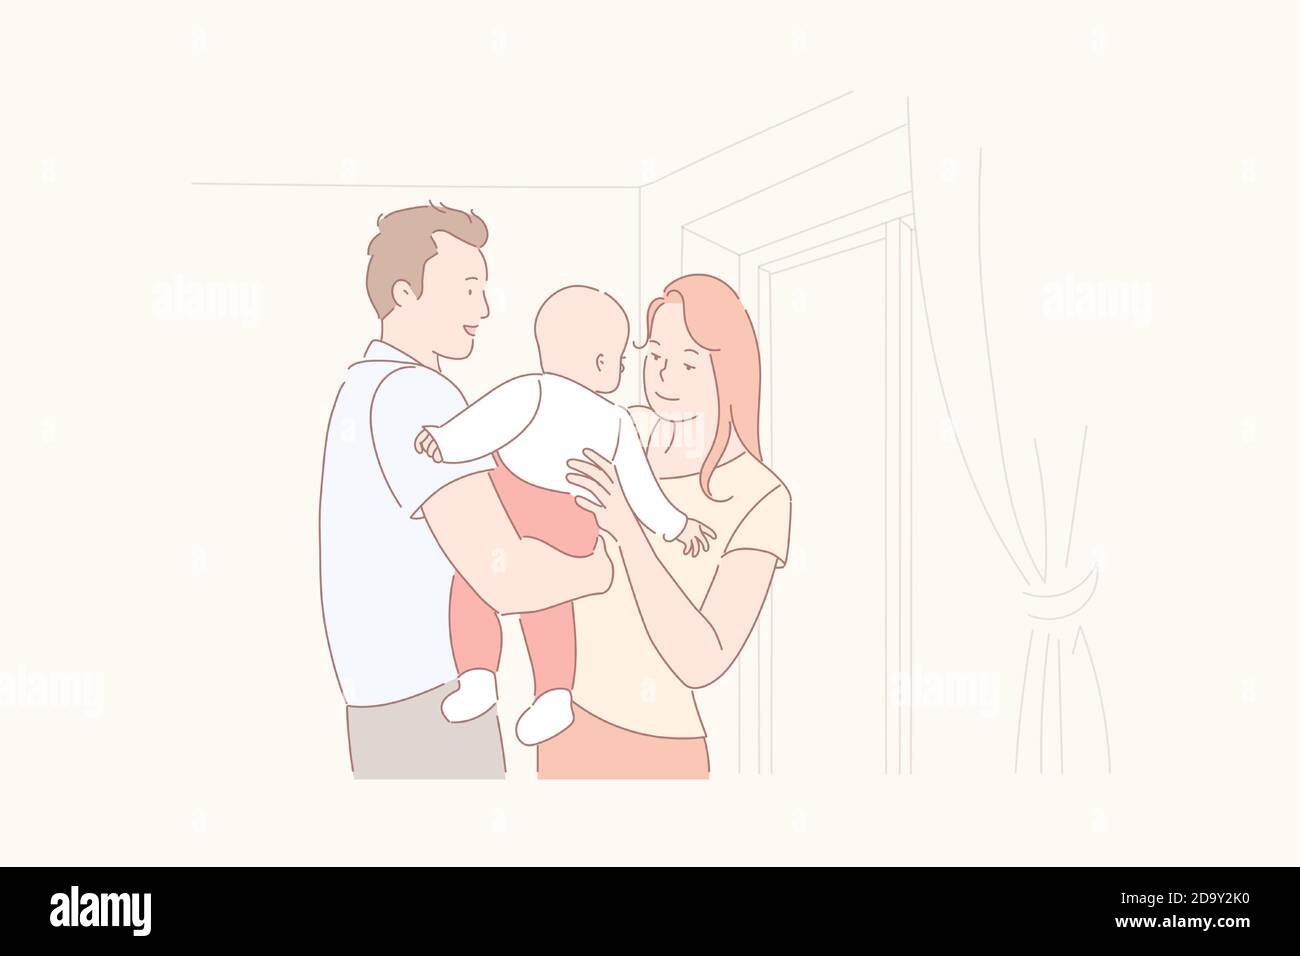 Family life, parenthood, baby care concept Stock Vector